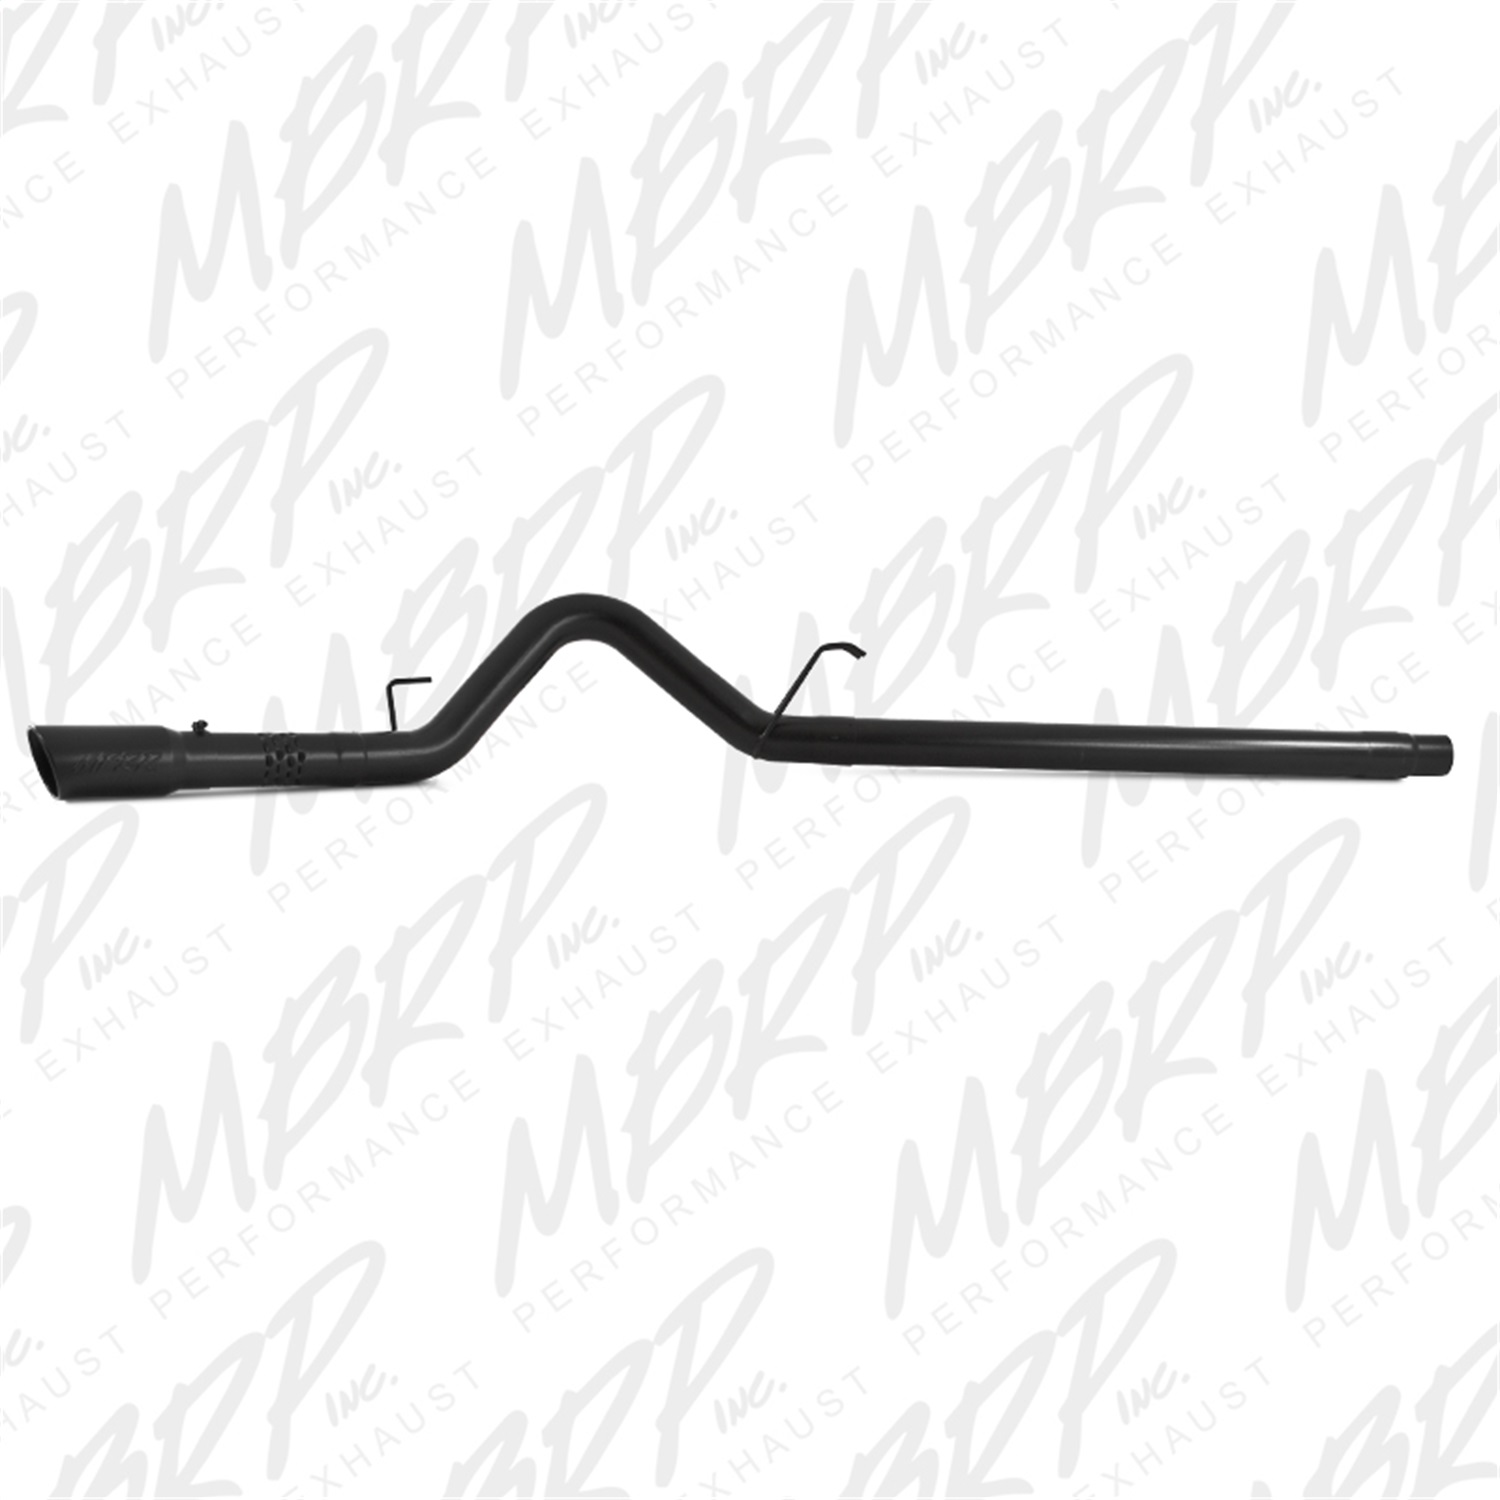 MBRP 4" EXHAUST 08-10 FORD POWERSTROKE DIESEL F250 F350 6.4L FILTER